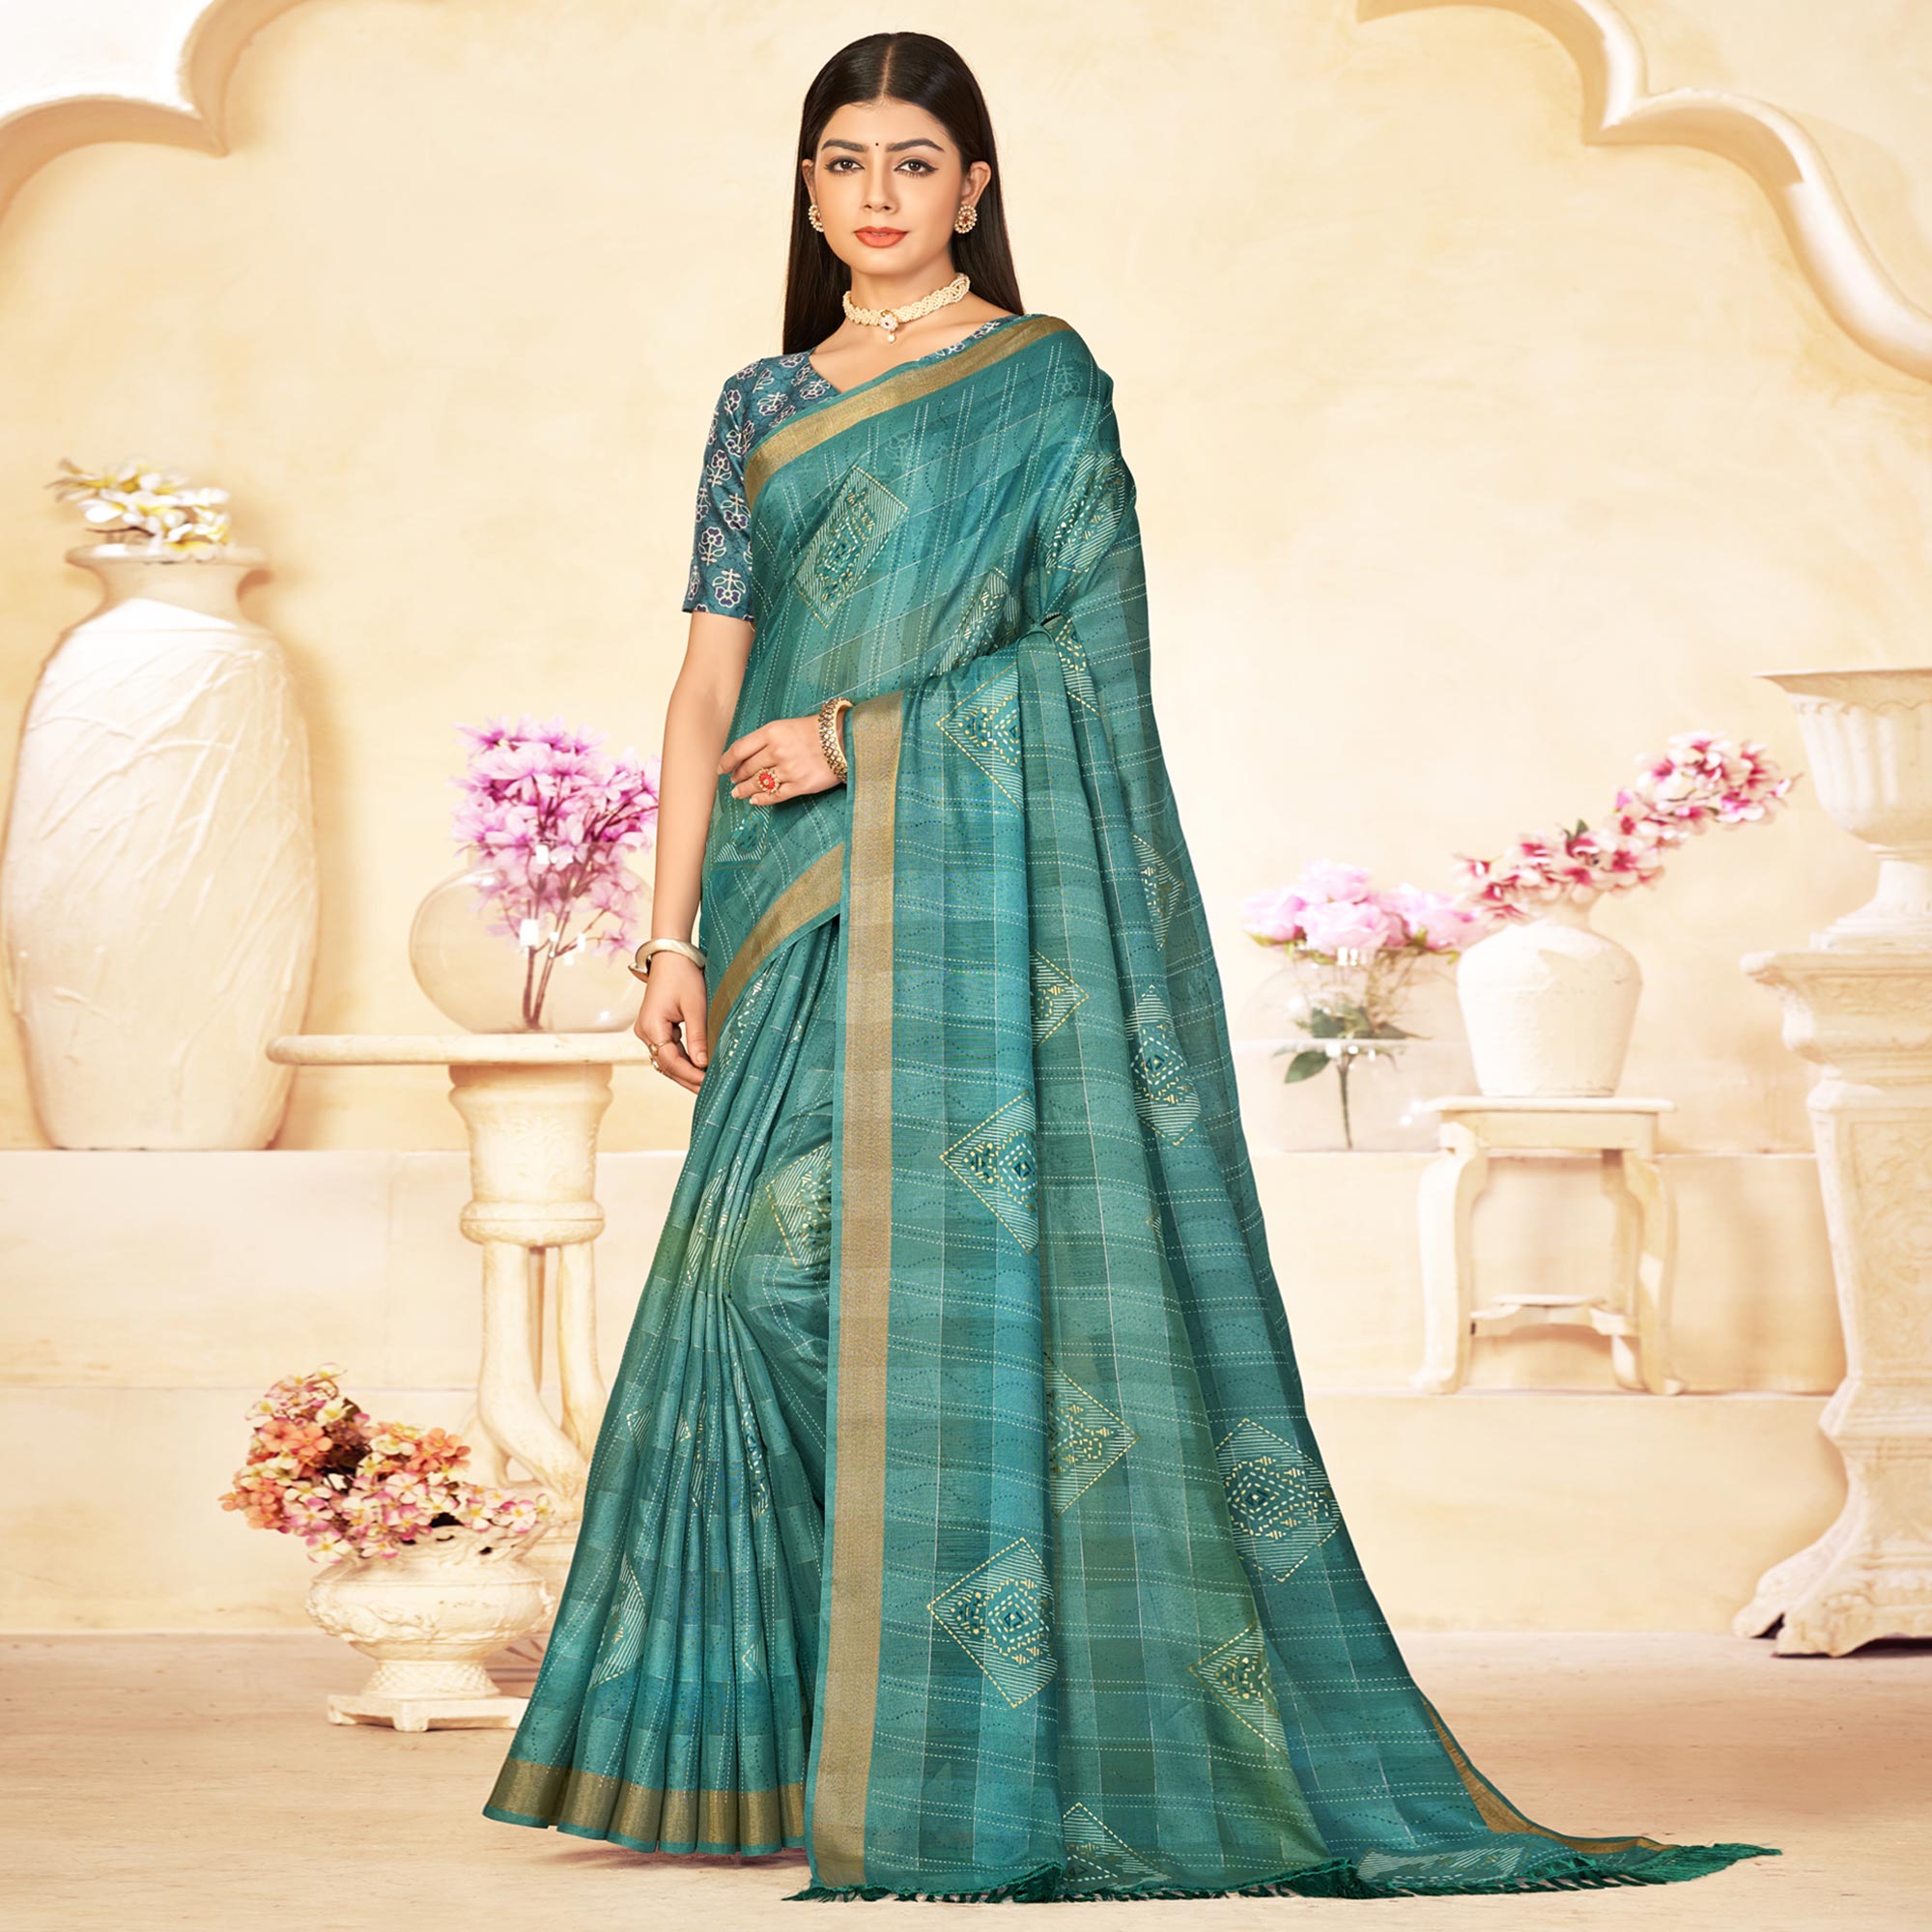 Teal Foil Printed Linen Silk Saree With Tassels